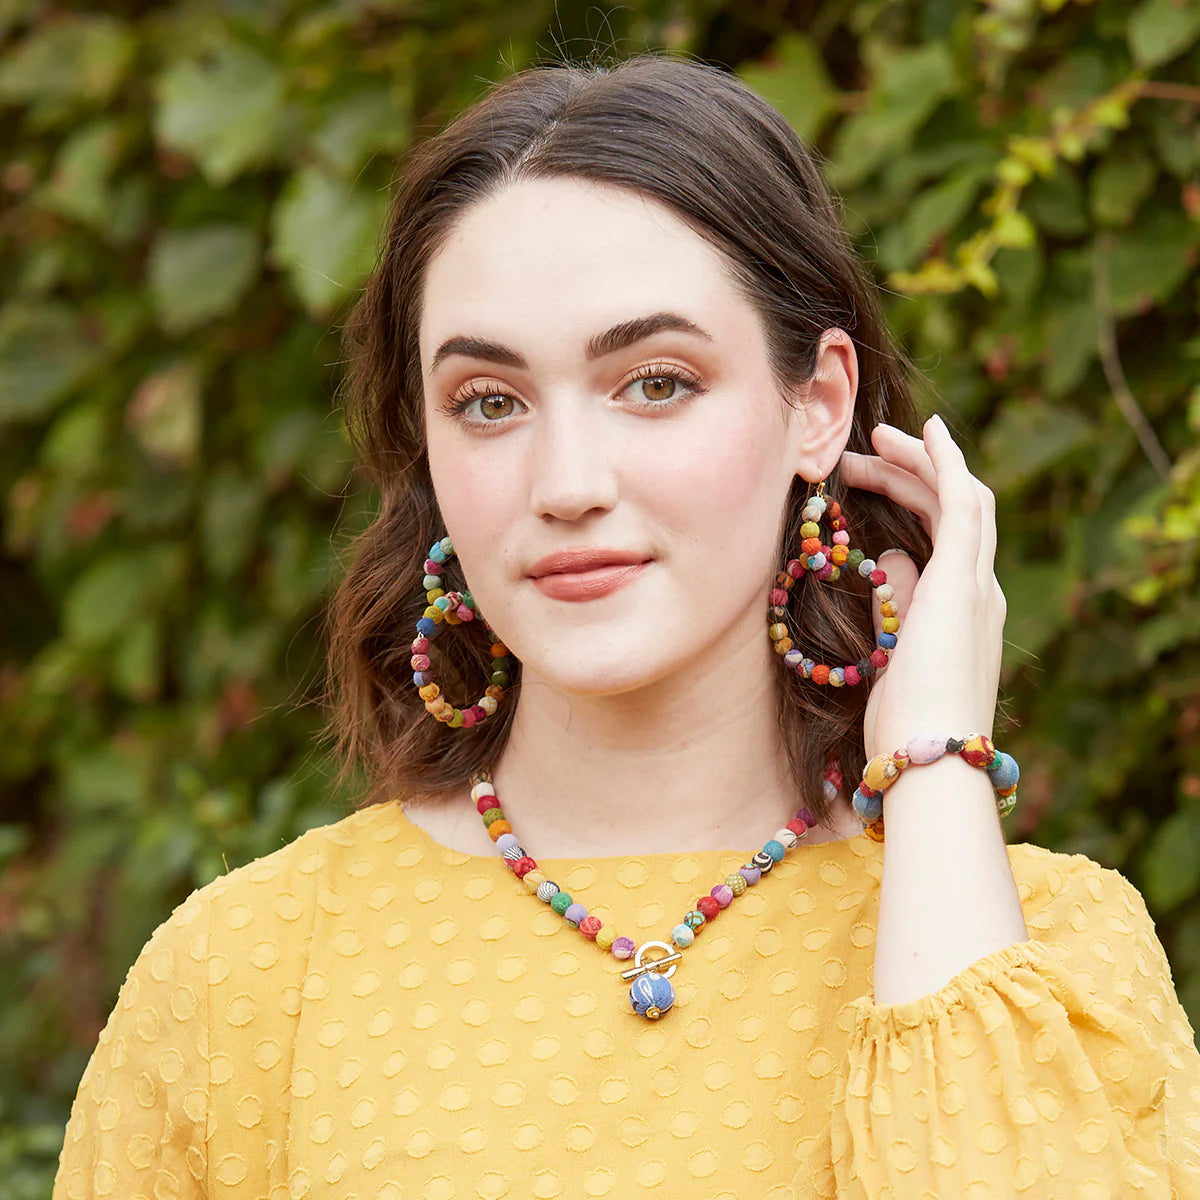 Angelco Accessories kantha toggle necklace worn by model with kantha earrings and bracelet